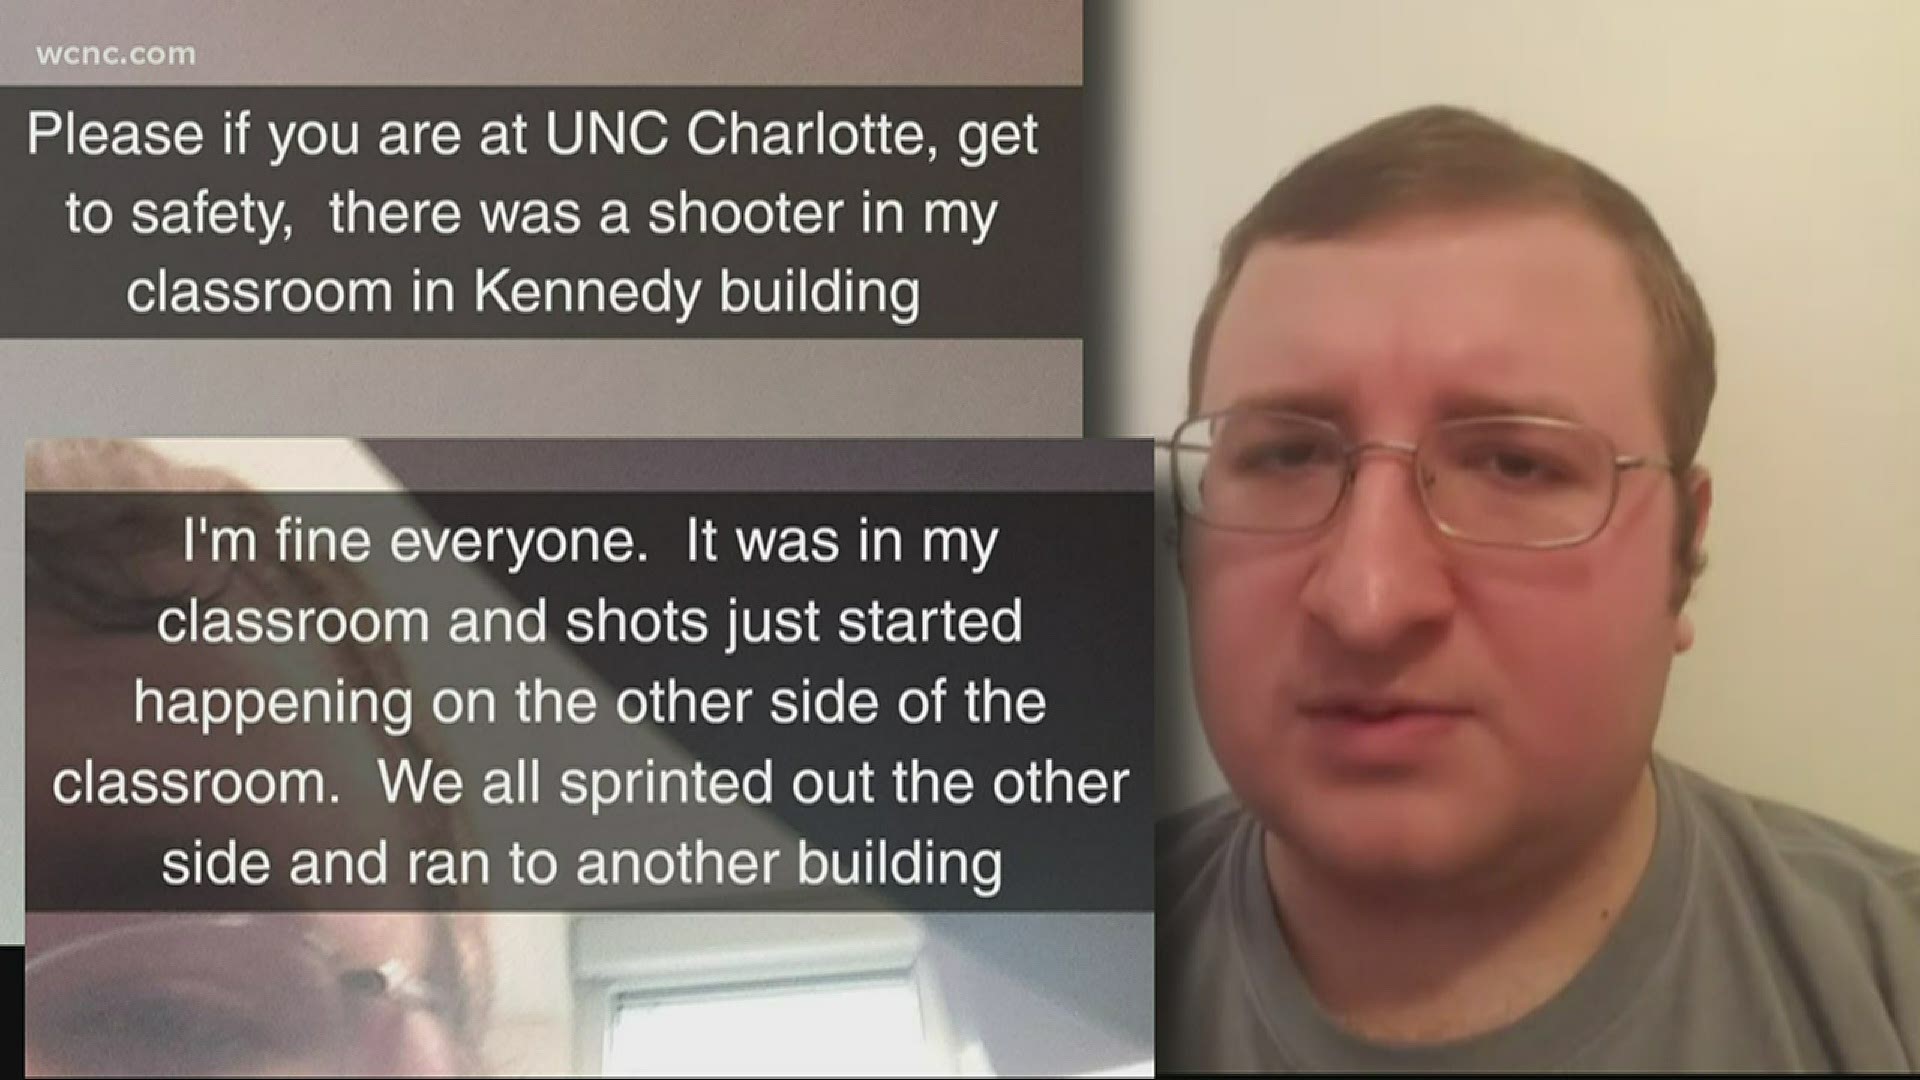 Thursday will be an emotional day for the UNCC community as it marks the one-year anniversary of a shooting that killed two students and hurt four others.